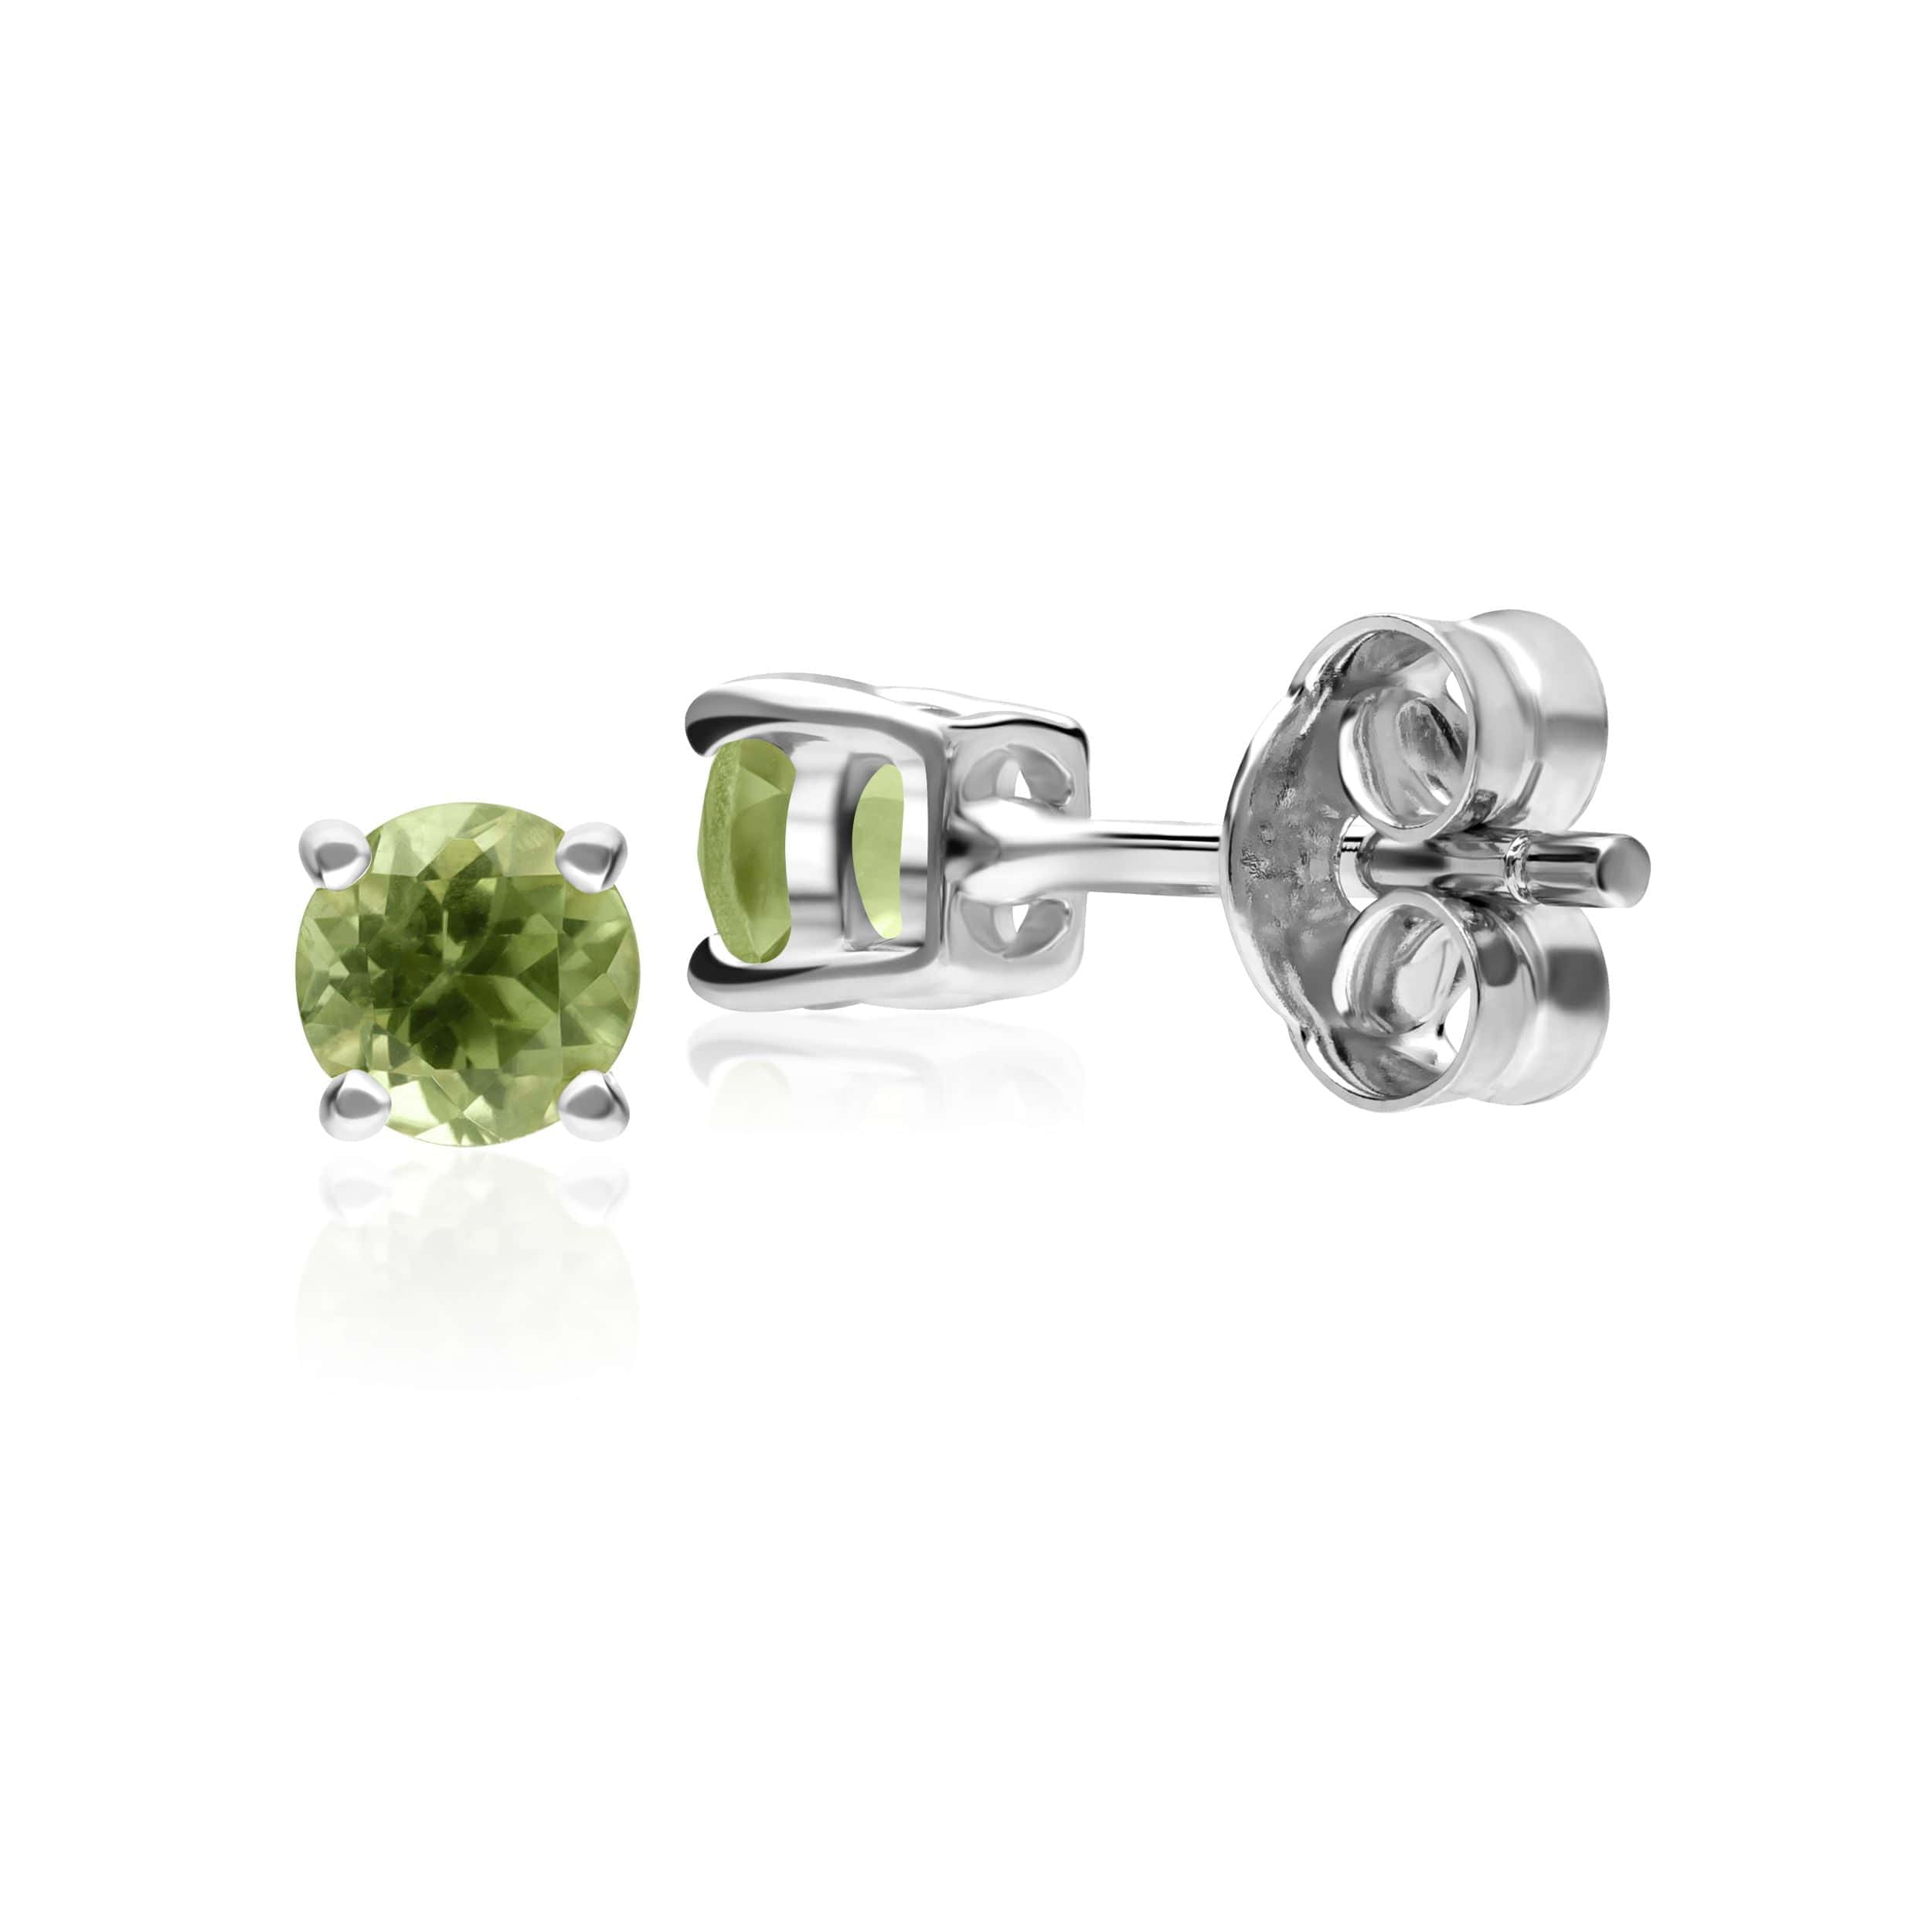 11614 Classic Round Peridot Stud Earrings in 9ct White Gold 2